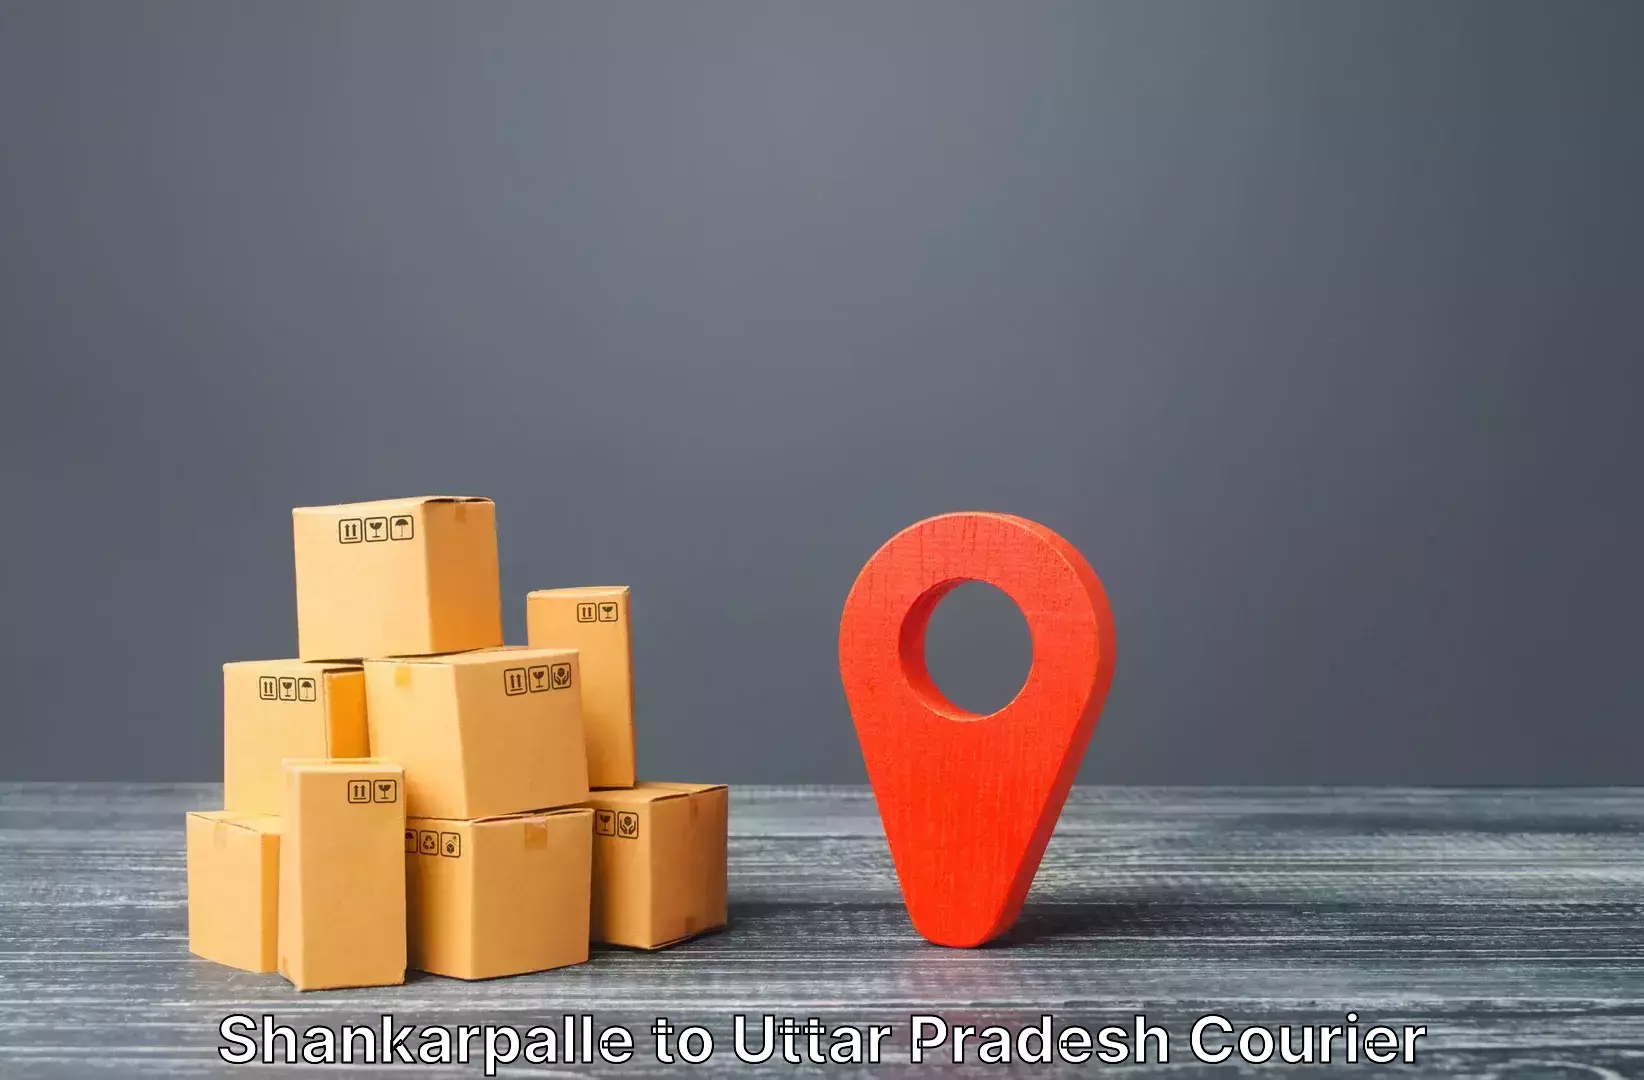 Baggage shipping service Shankarpalle to Agra